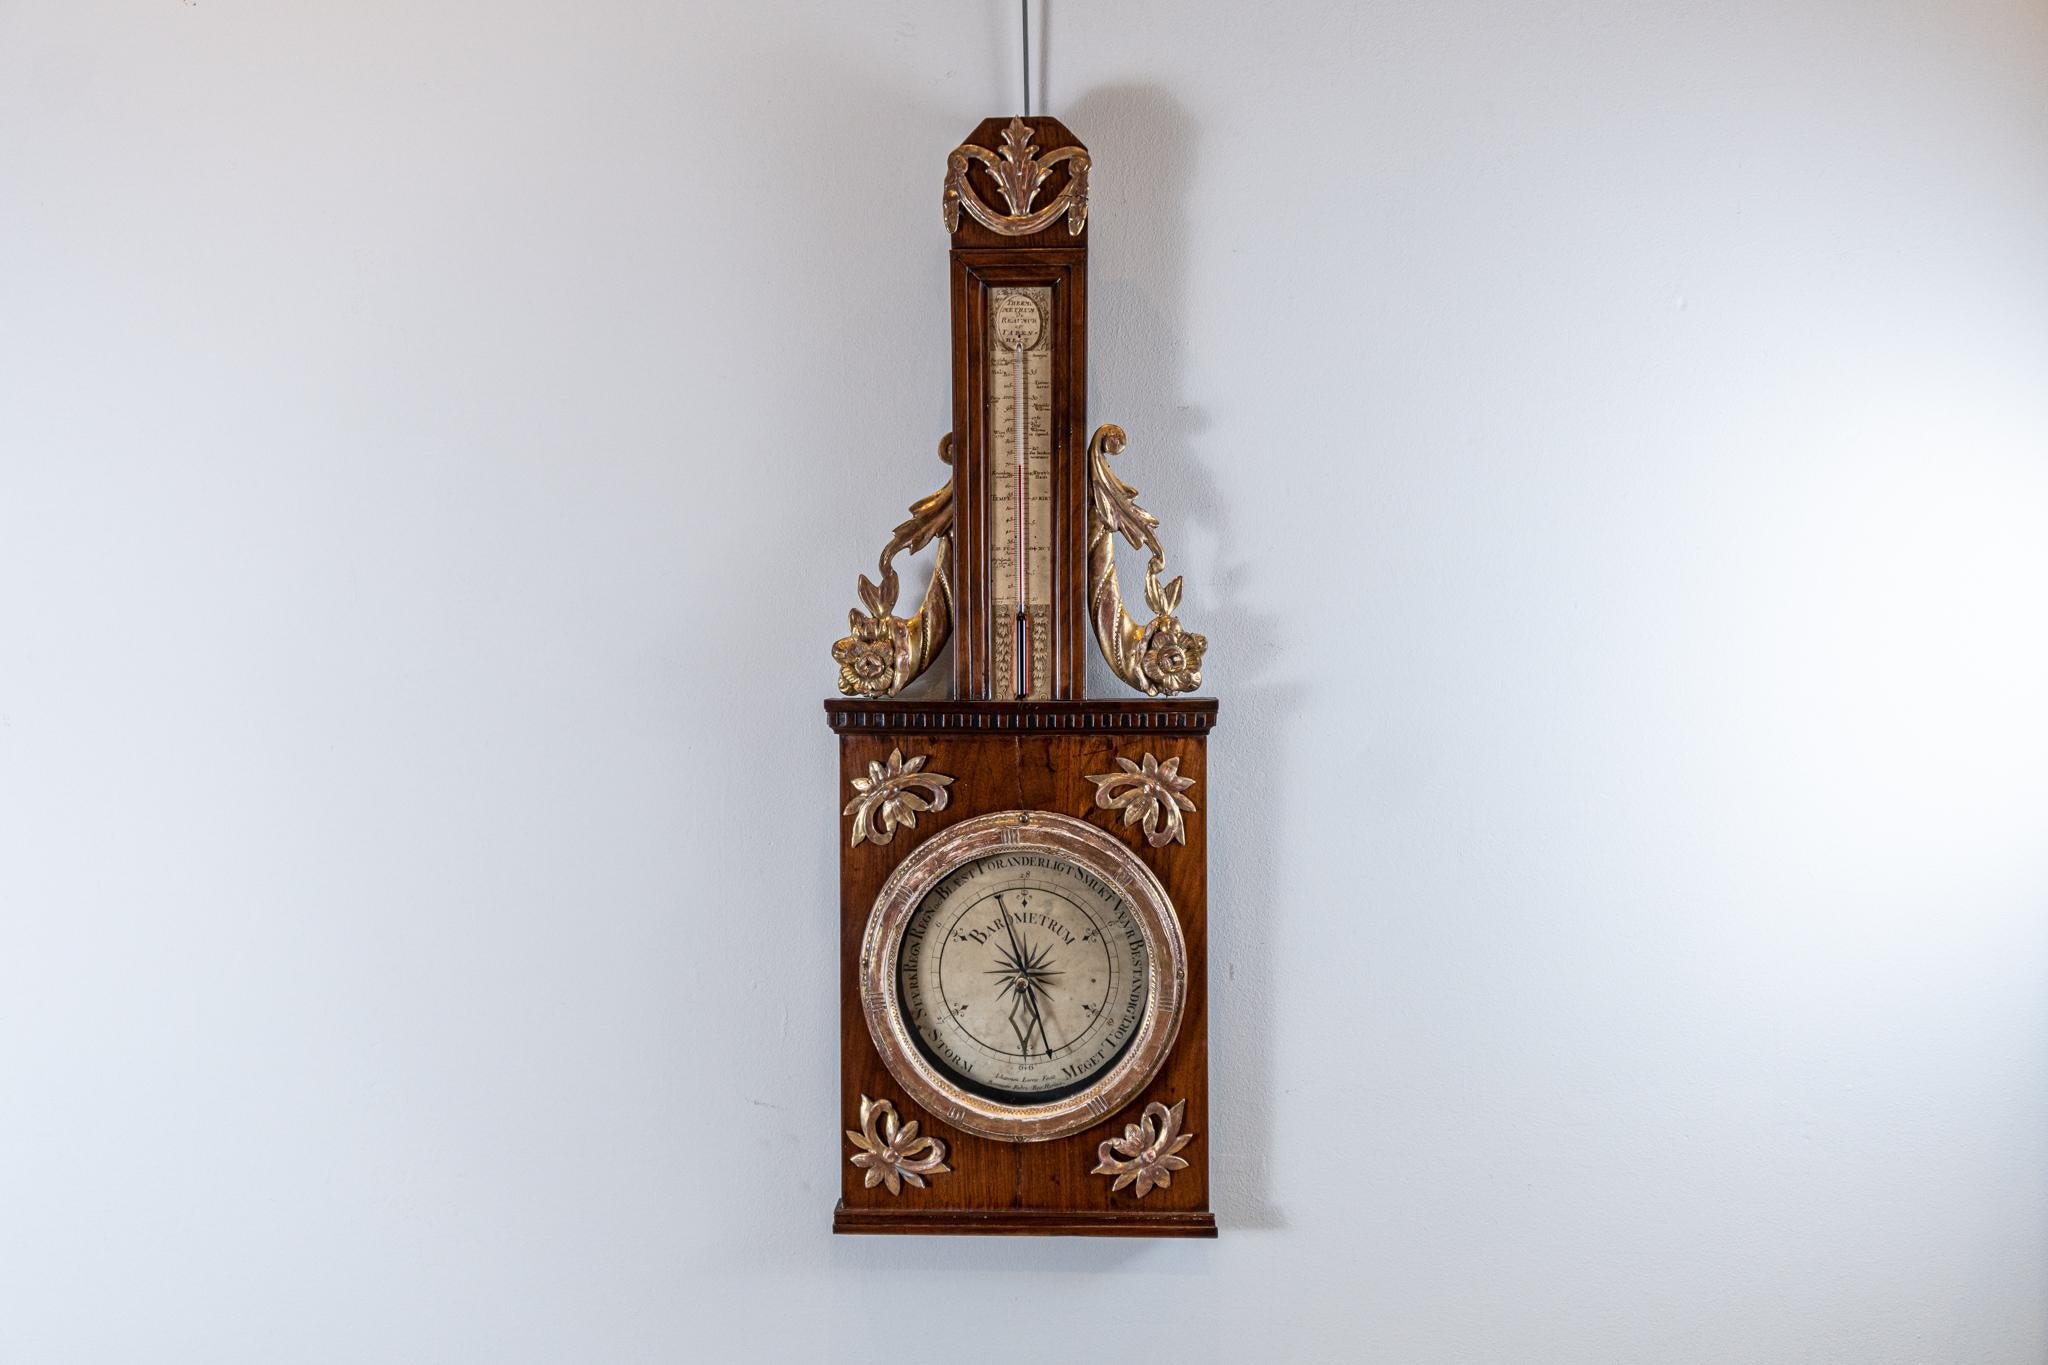 A highly decorative Swedish Gustavian barometer dating from the 1800s by Iohannes Lerra.

The dial sits centrally in a mahogany wood frame with applied gilded scrolled leaf decoration to the four corners.

The thermometer tube has delightful